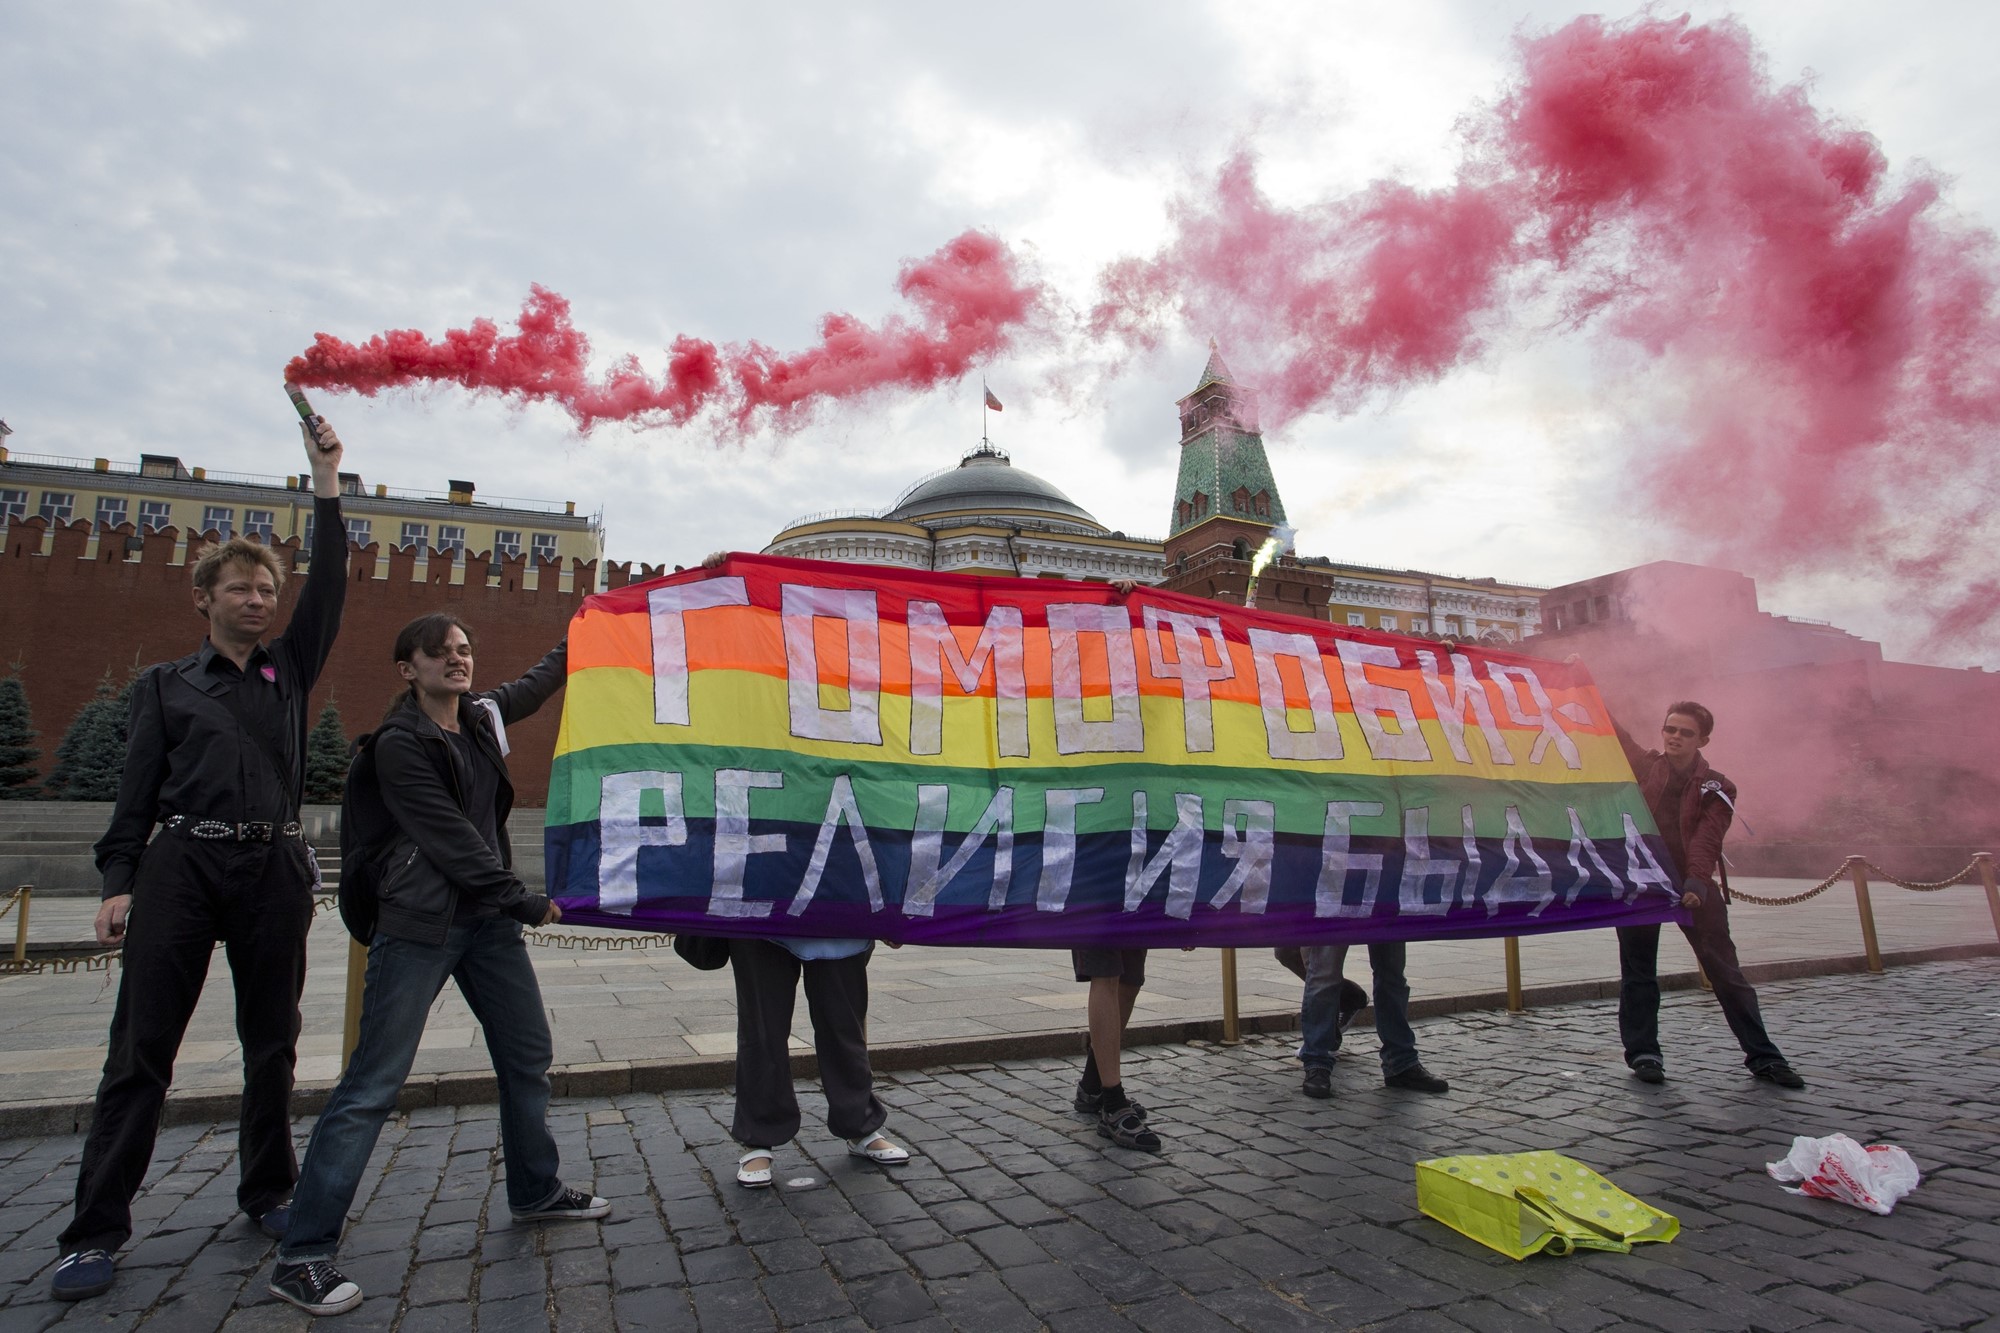 Multiple people hold a rainbow flag with Russian text on it. One person is letting off a flare with red smoke.